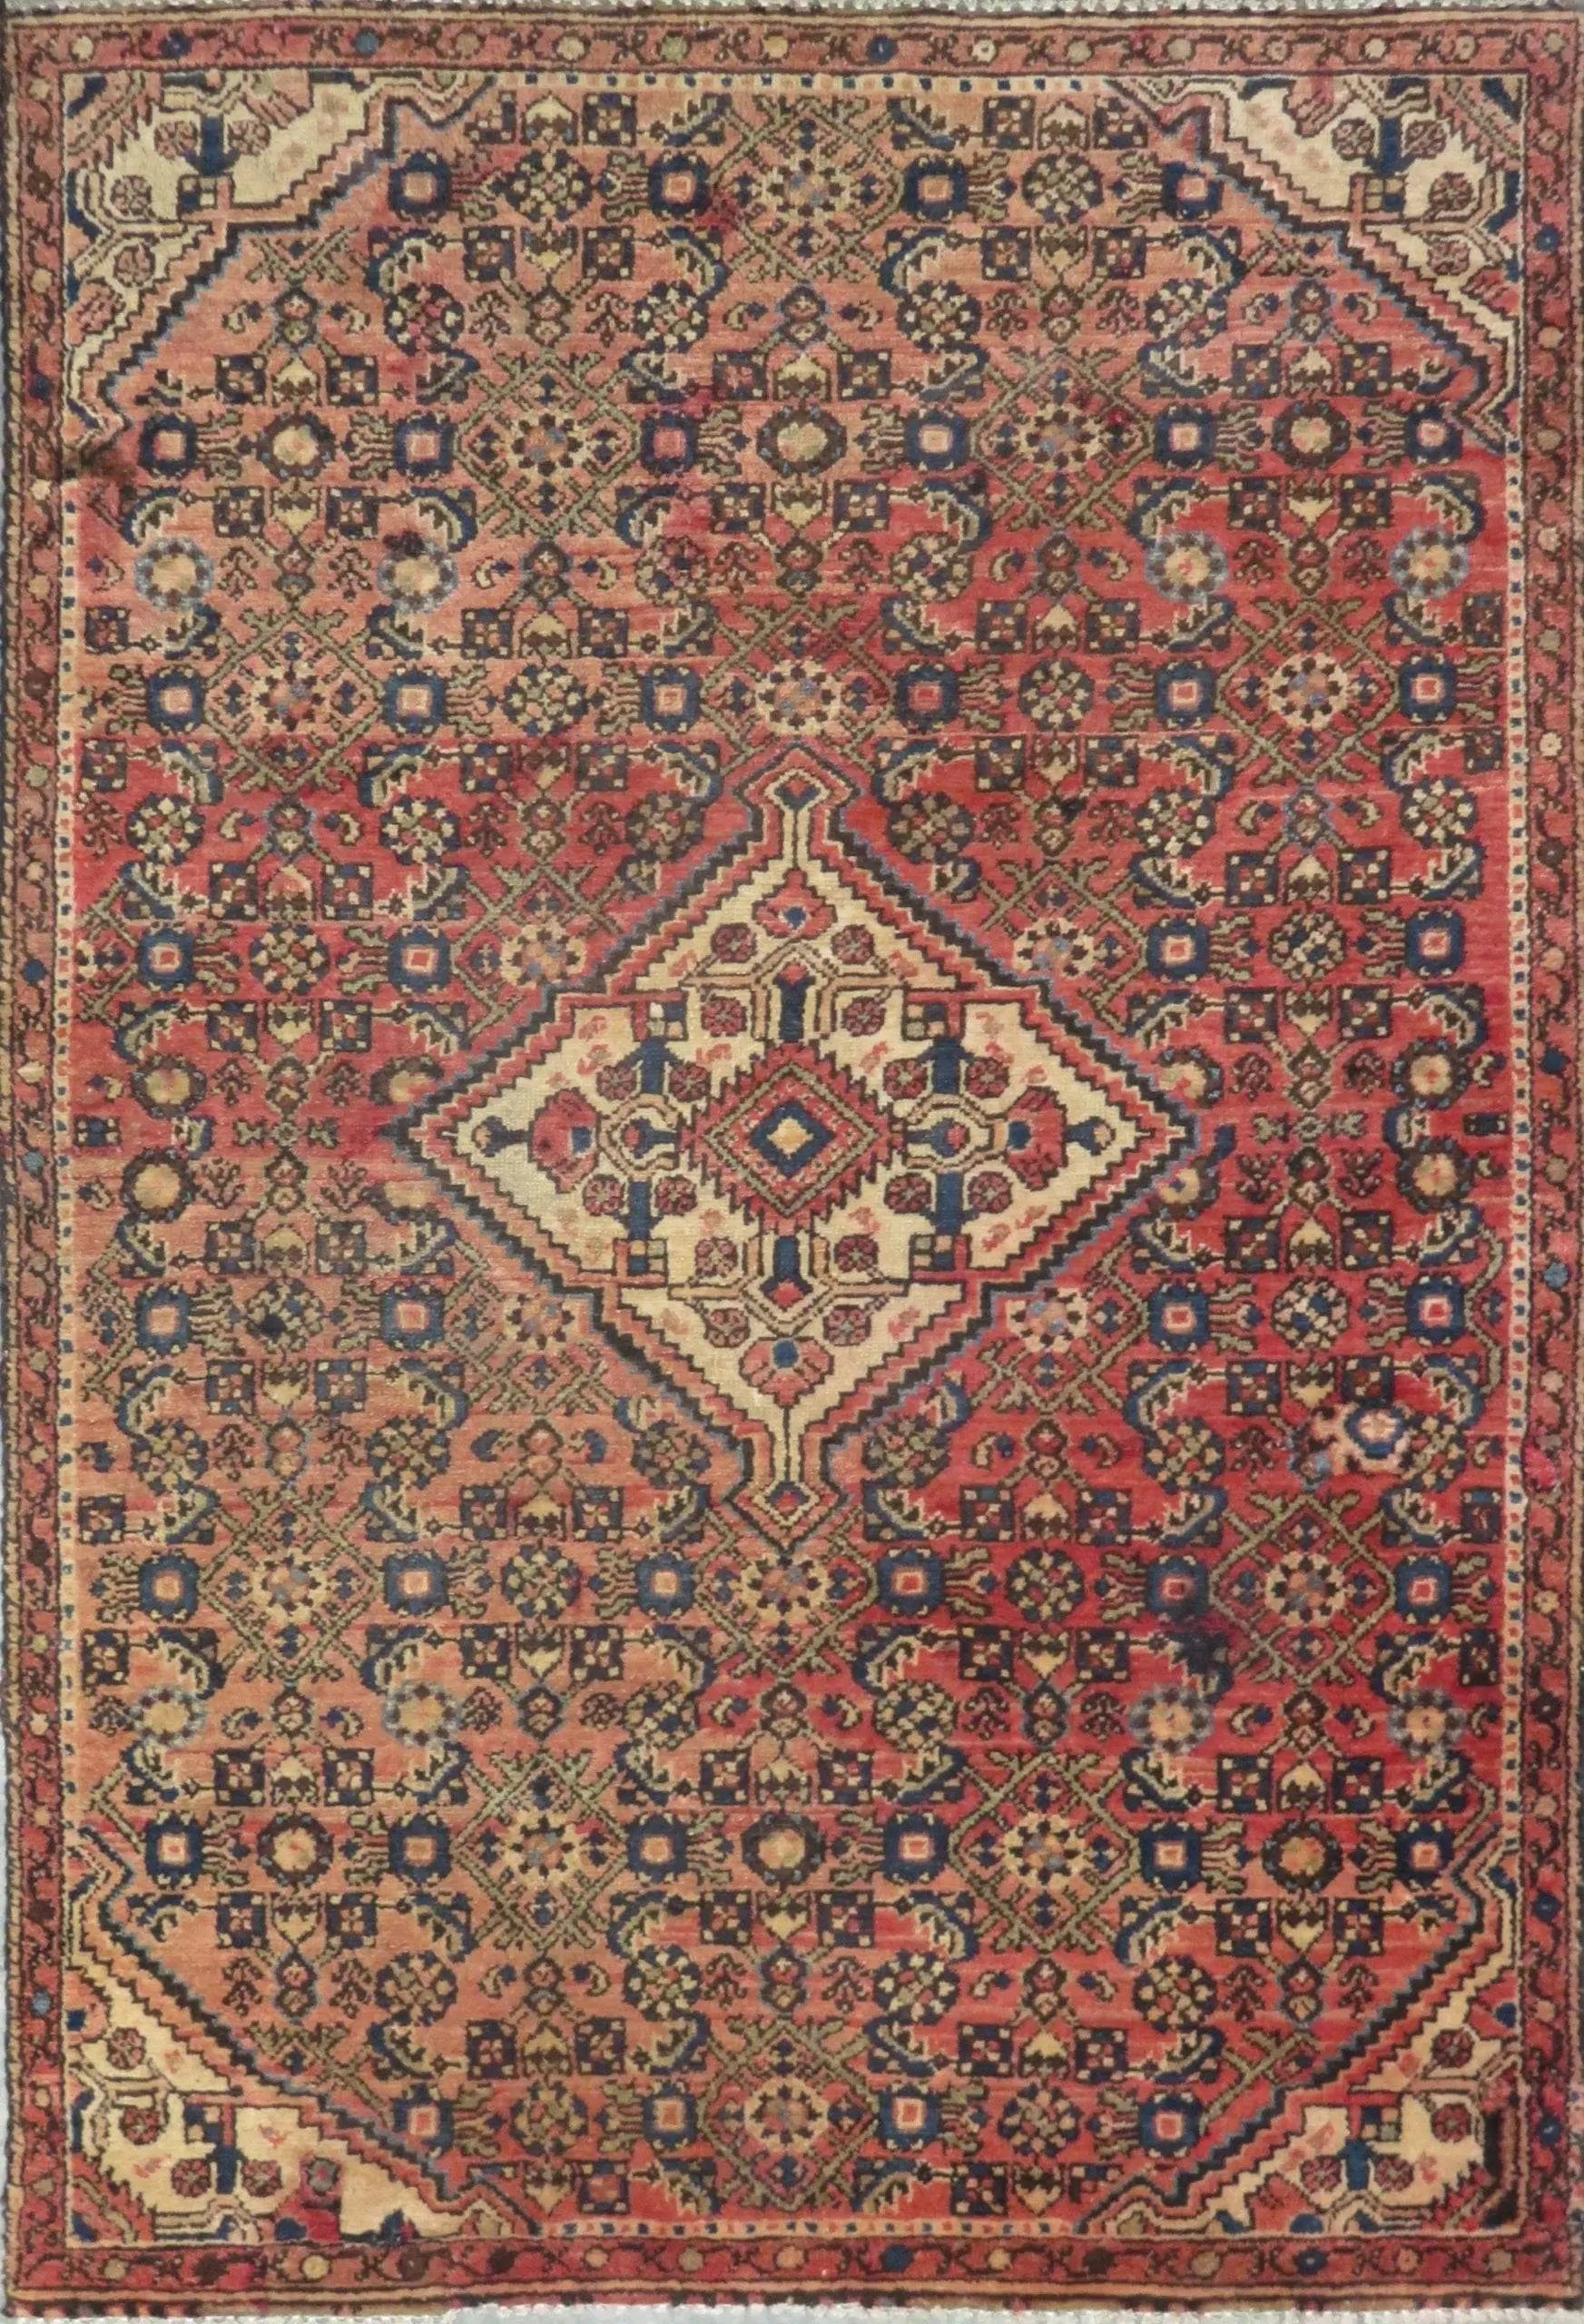 Hand-Knotted Persian Wool Rug _ Luxurious Vintage Design, 5'6" x 3'8", Artisan Crafted